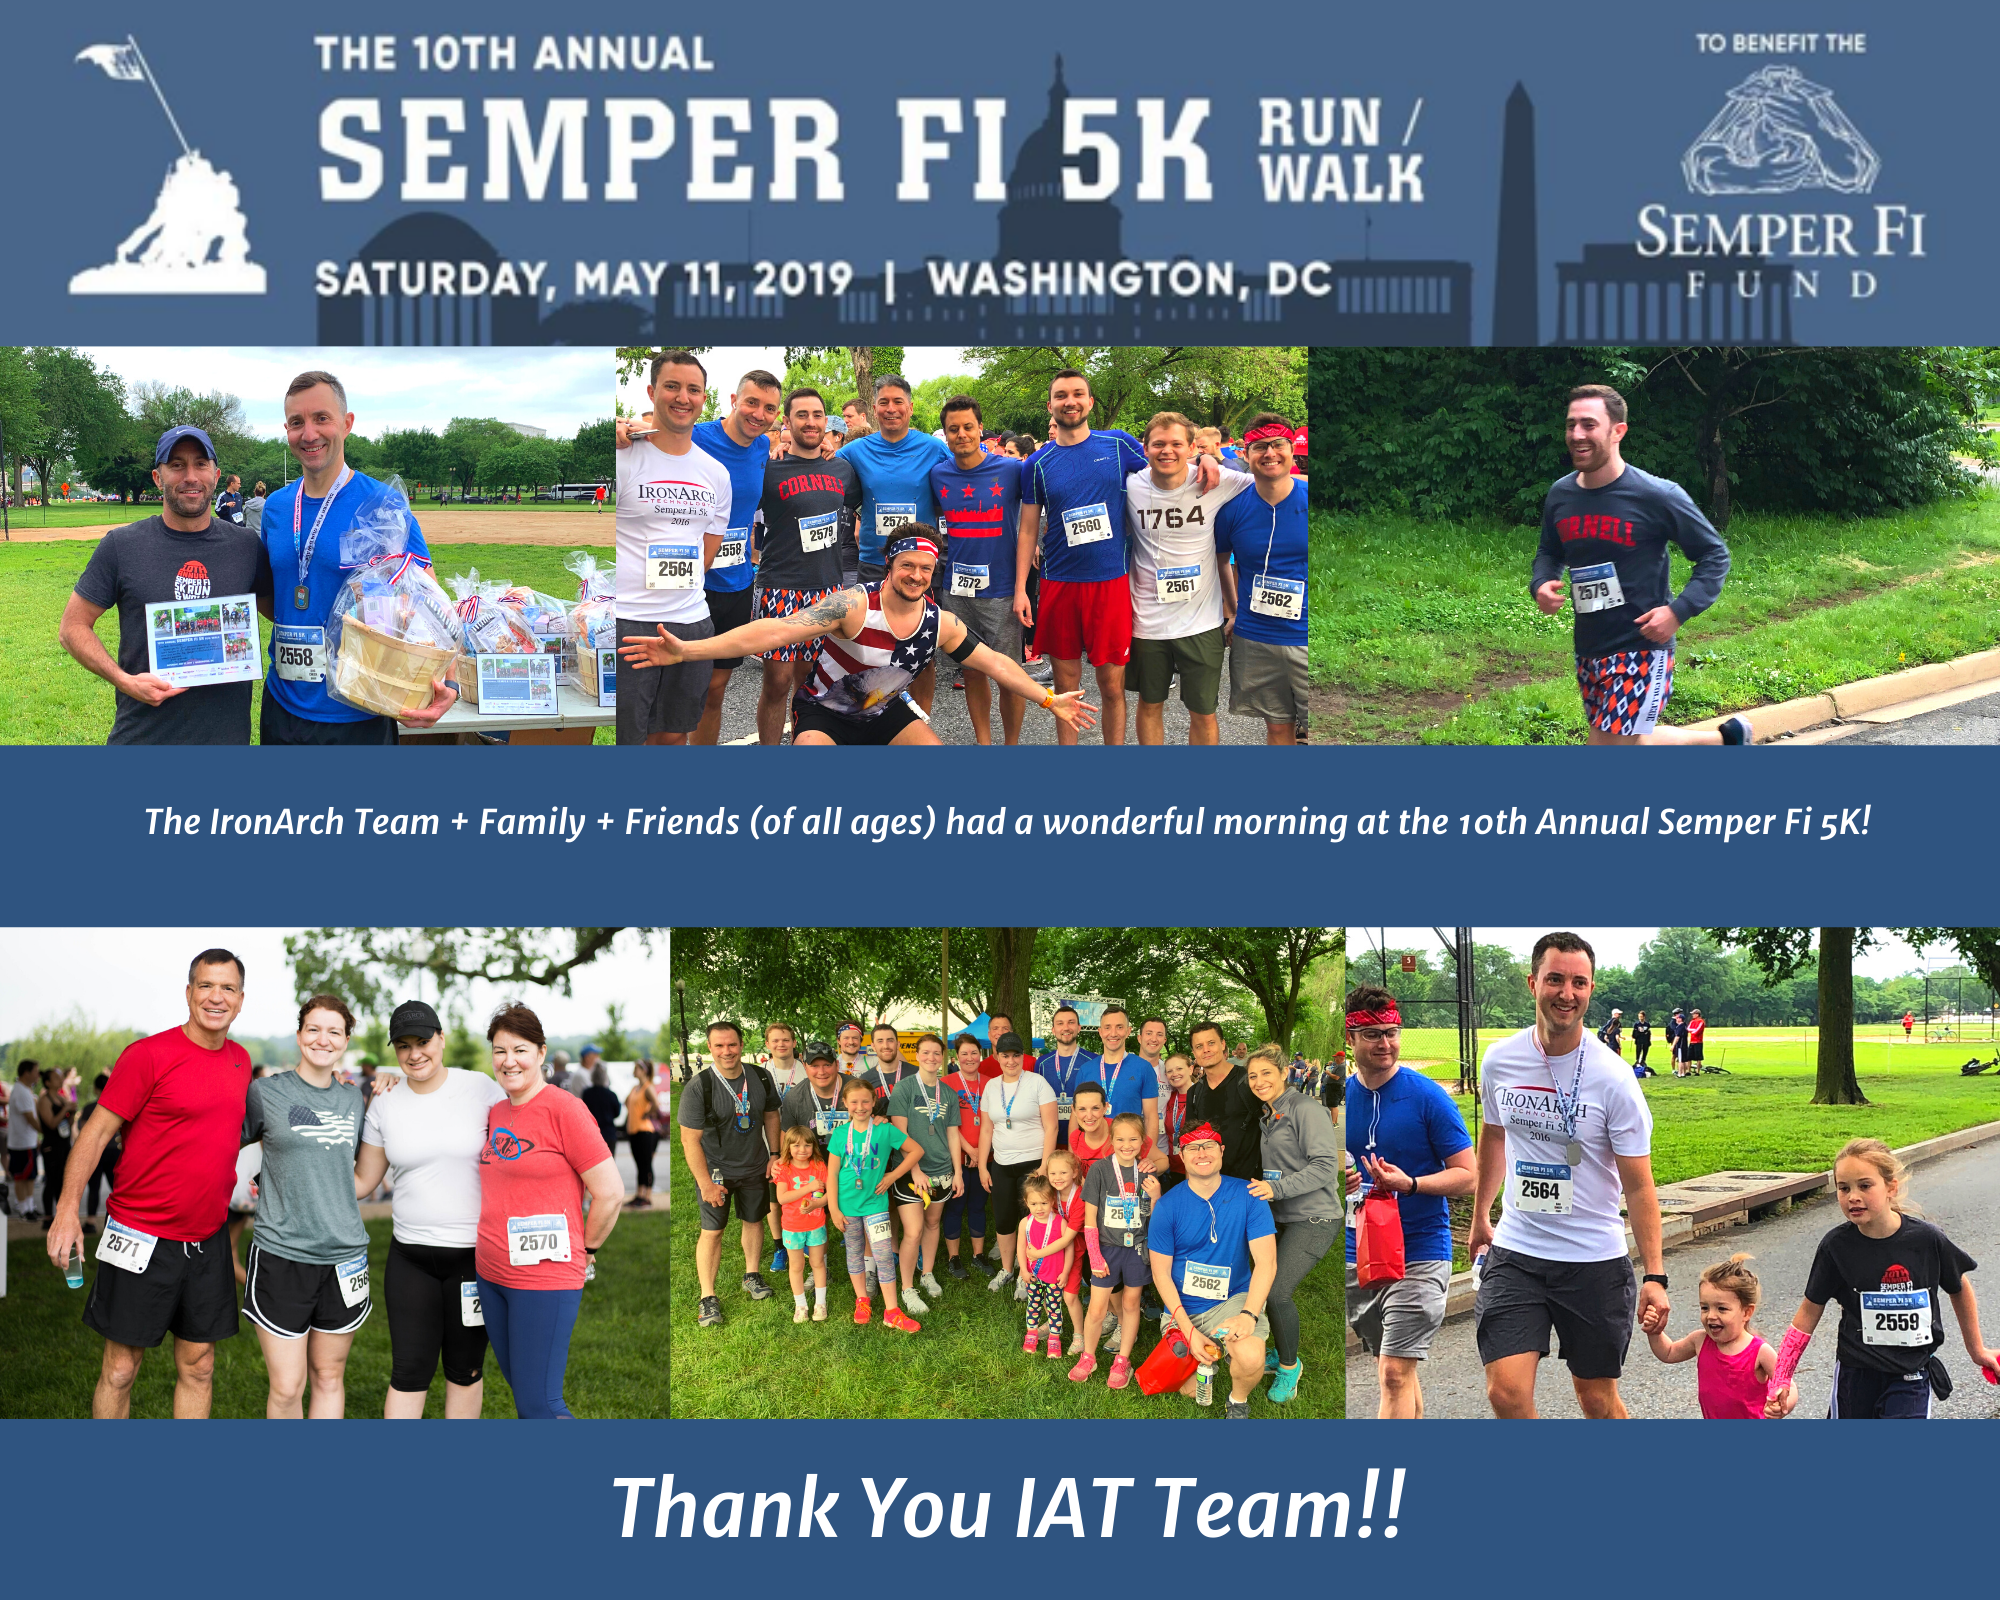 Semper Fi 5K Run/Walk, Saturday, May 11, 2019. Text reads: The IronArch Team + Family + Friends (of all ages) had a wonderful morning at the 10th Annual Semper Fi 5K! Thank you IAT Team!!